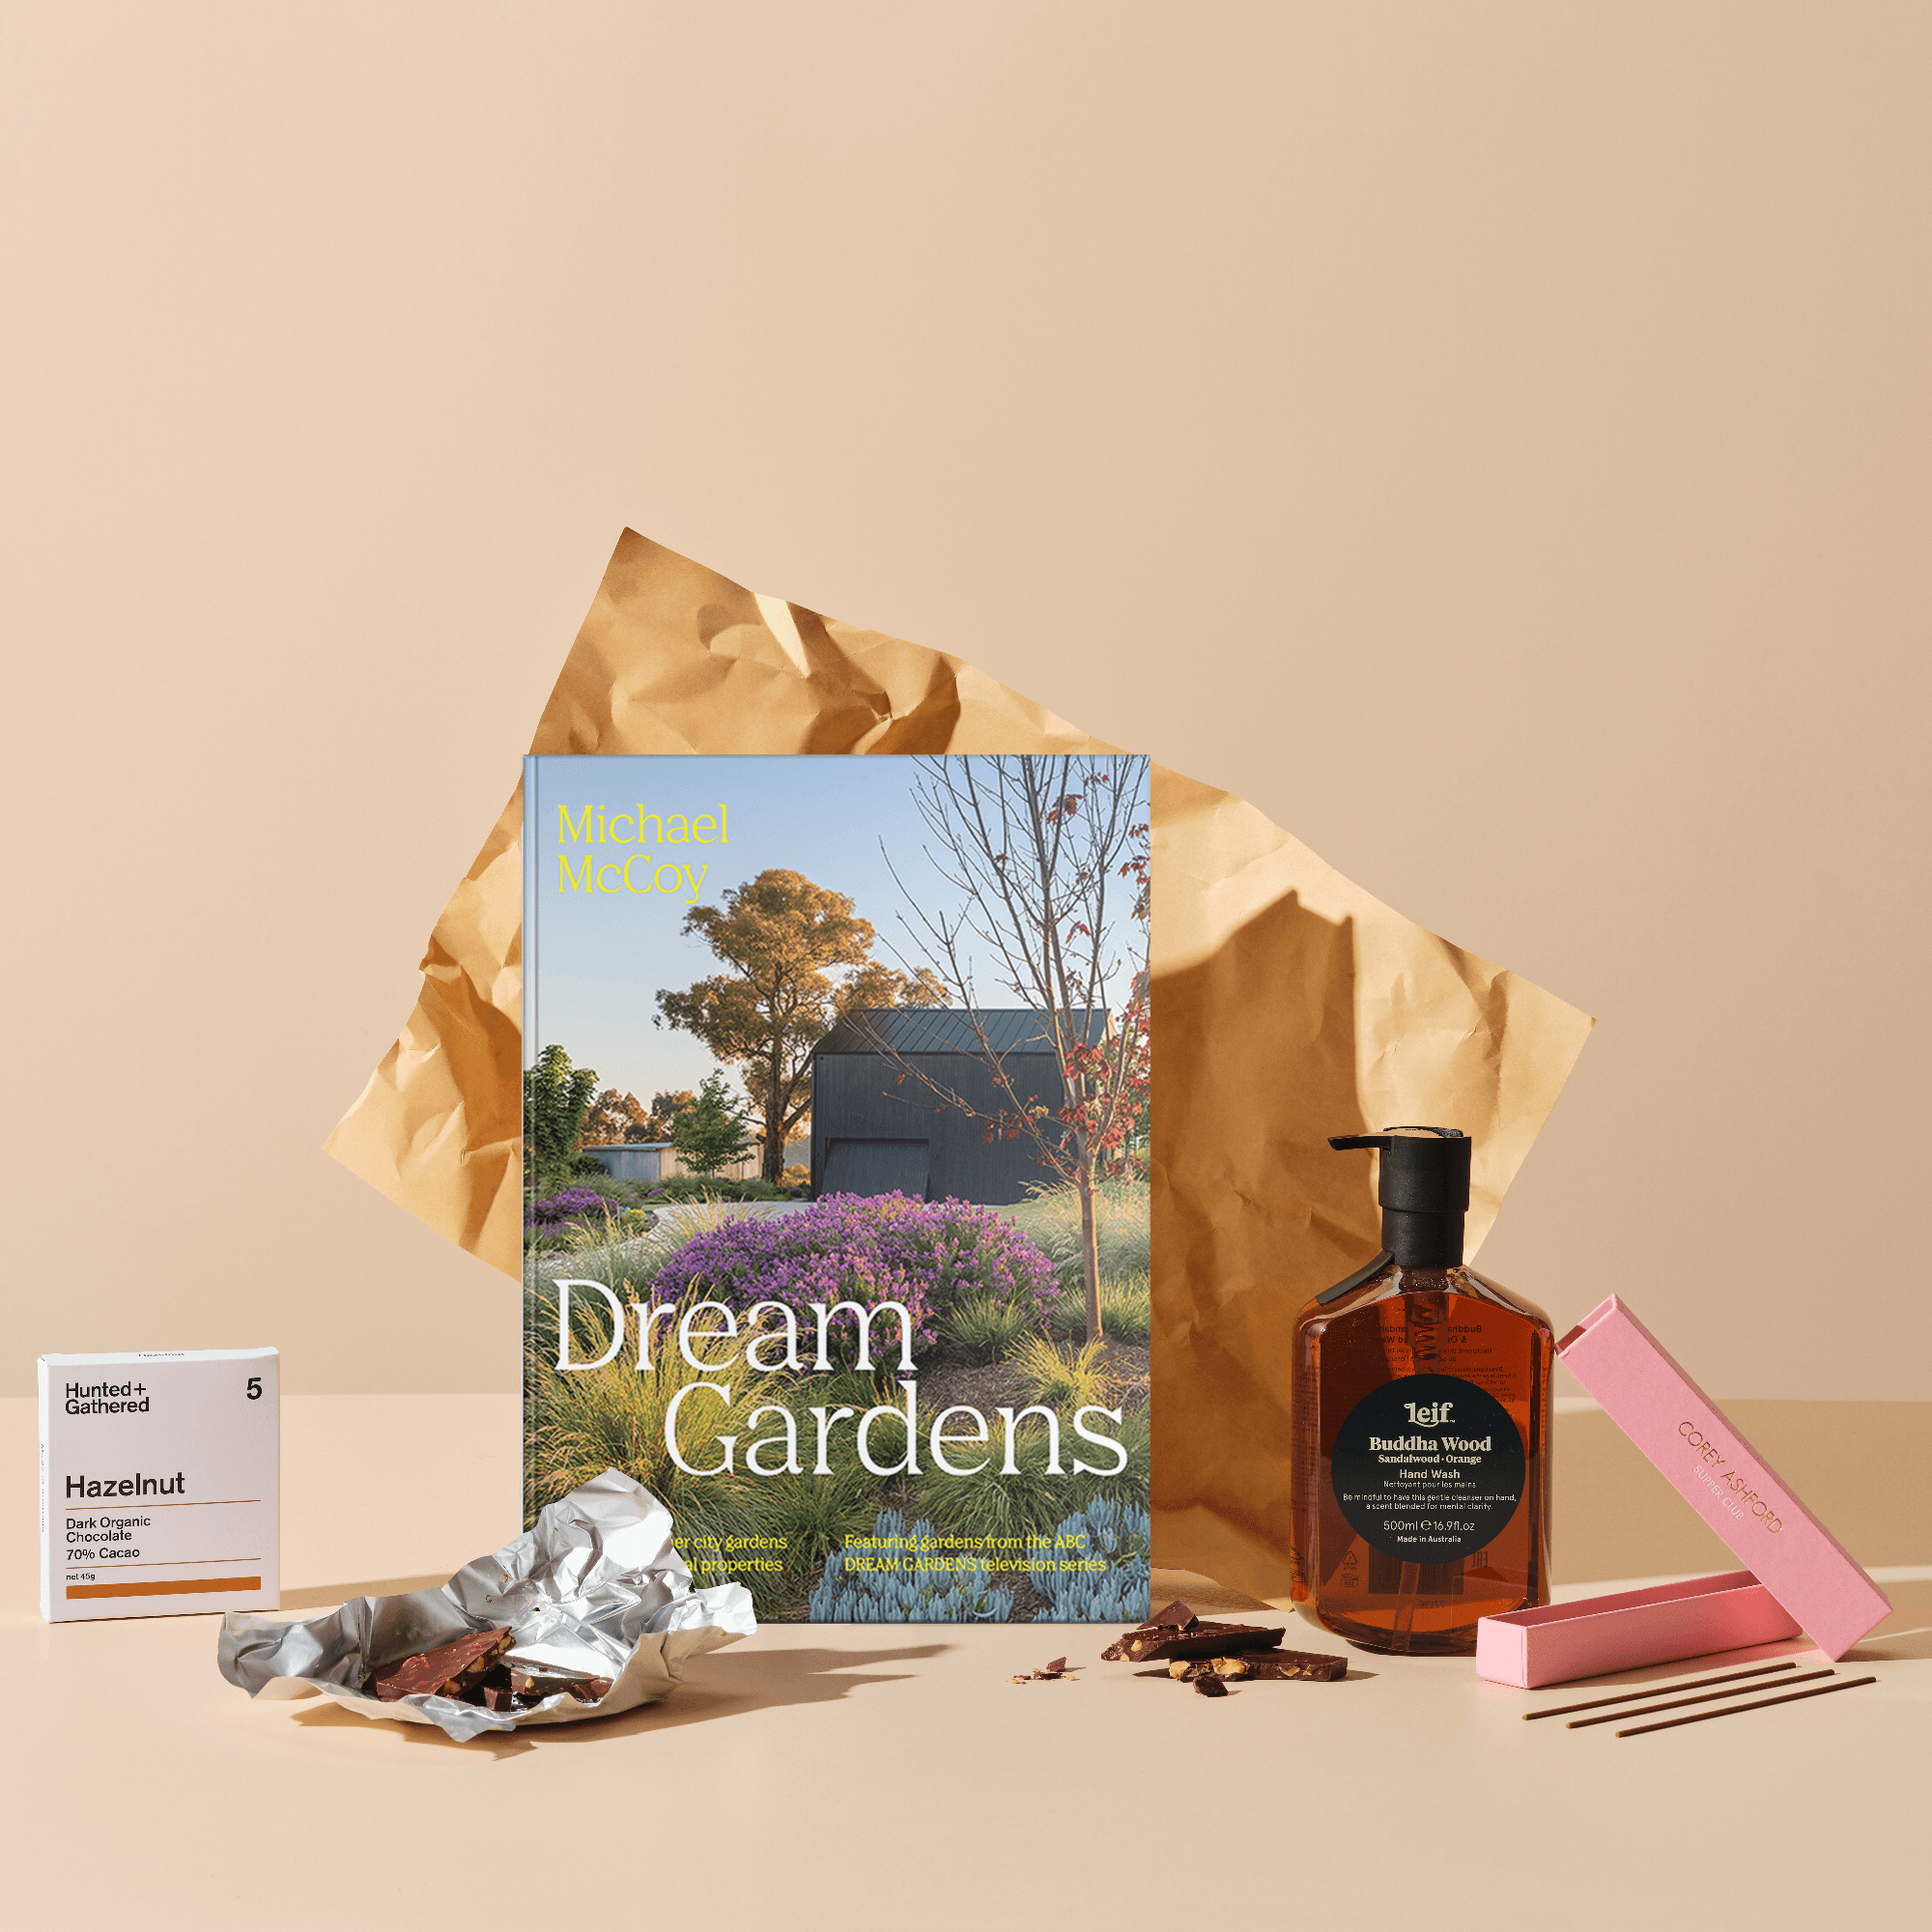 Happy Place regular pack, featuring our Dream Gardens book written by Michael McCoy 